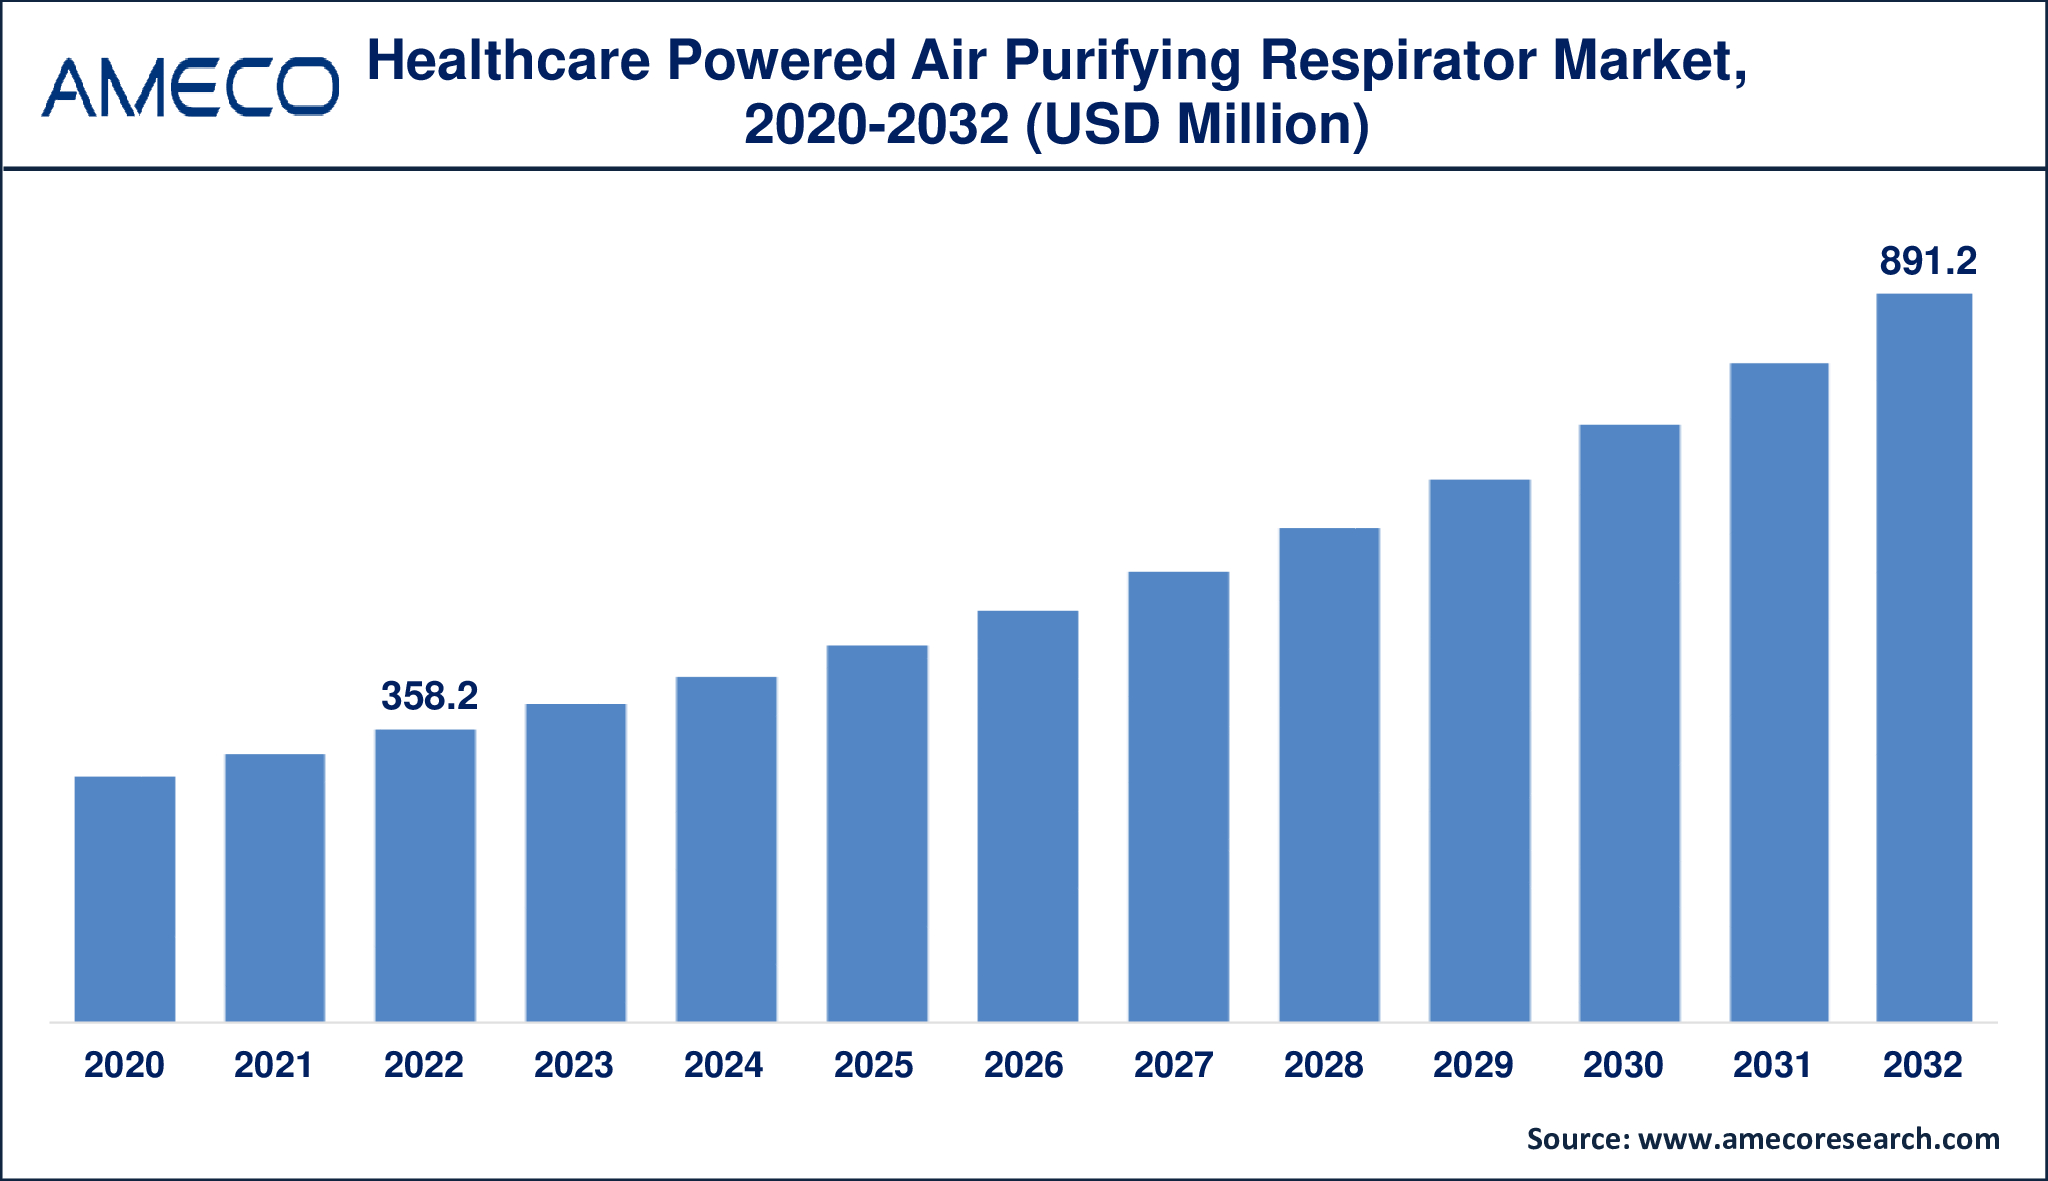 Healthcare Powered Air Purifying Respirator Market Dynamics